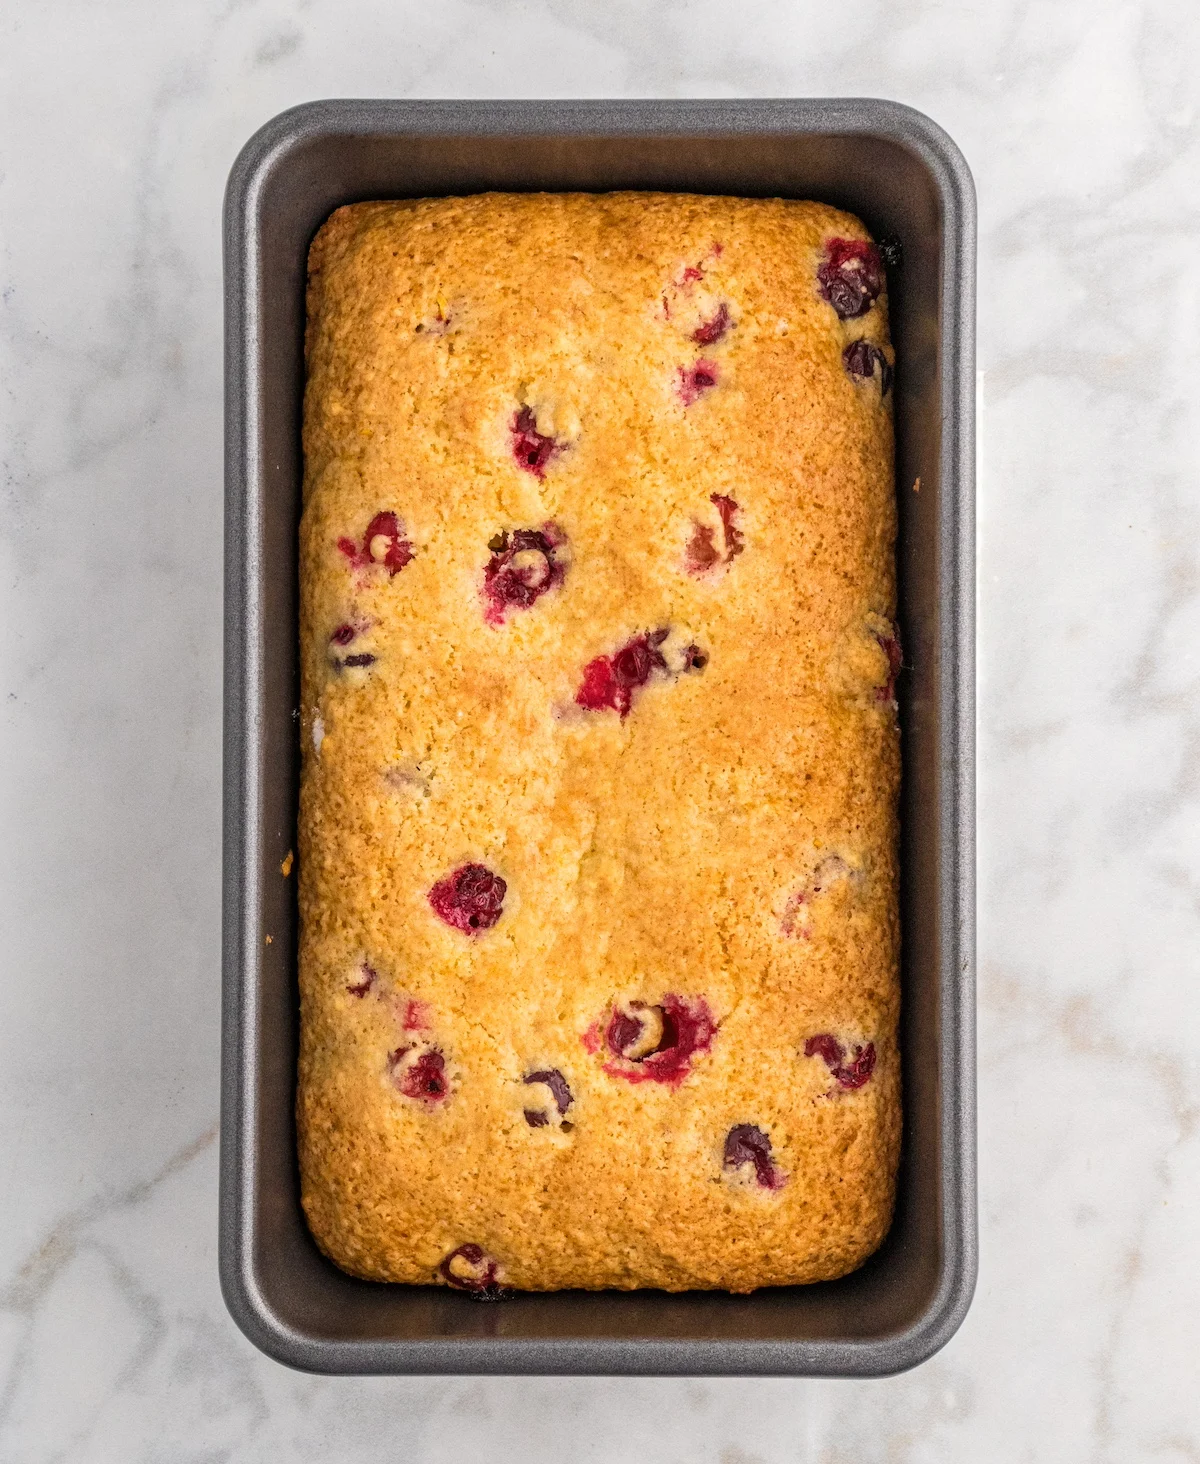 Baked cranberry orange bread in a loaf pan